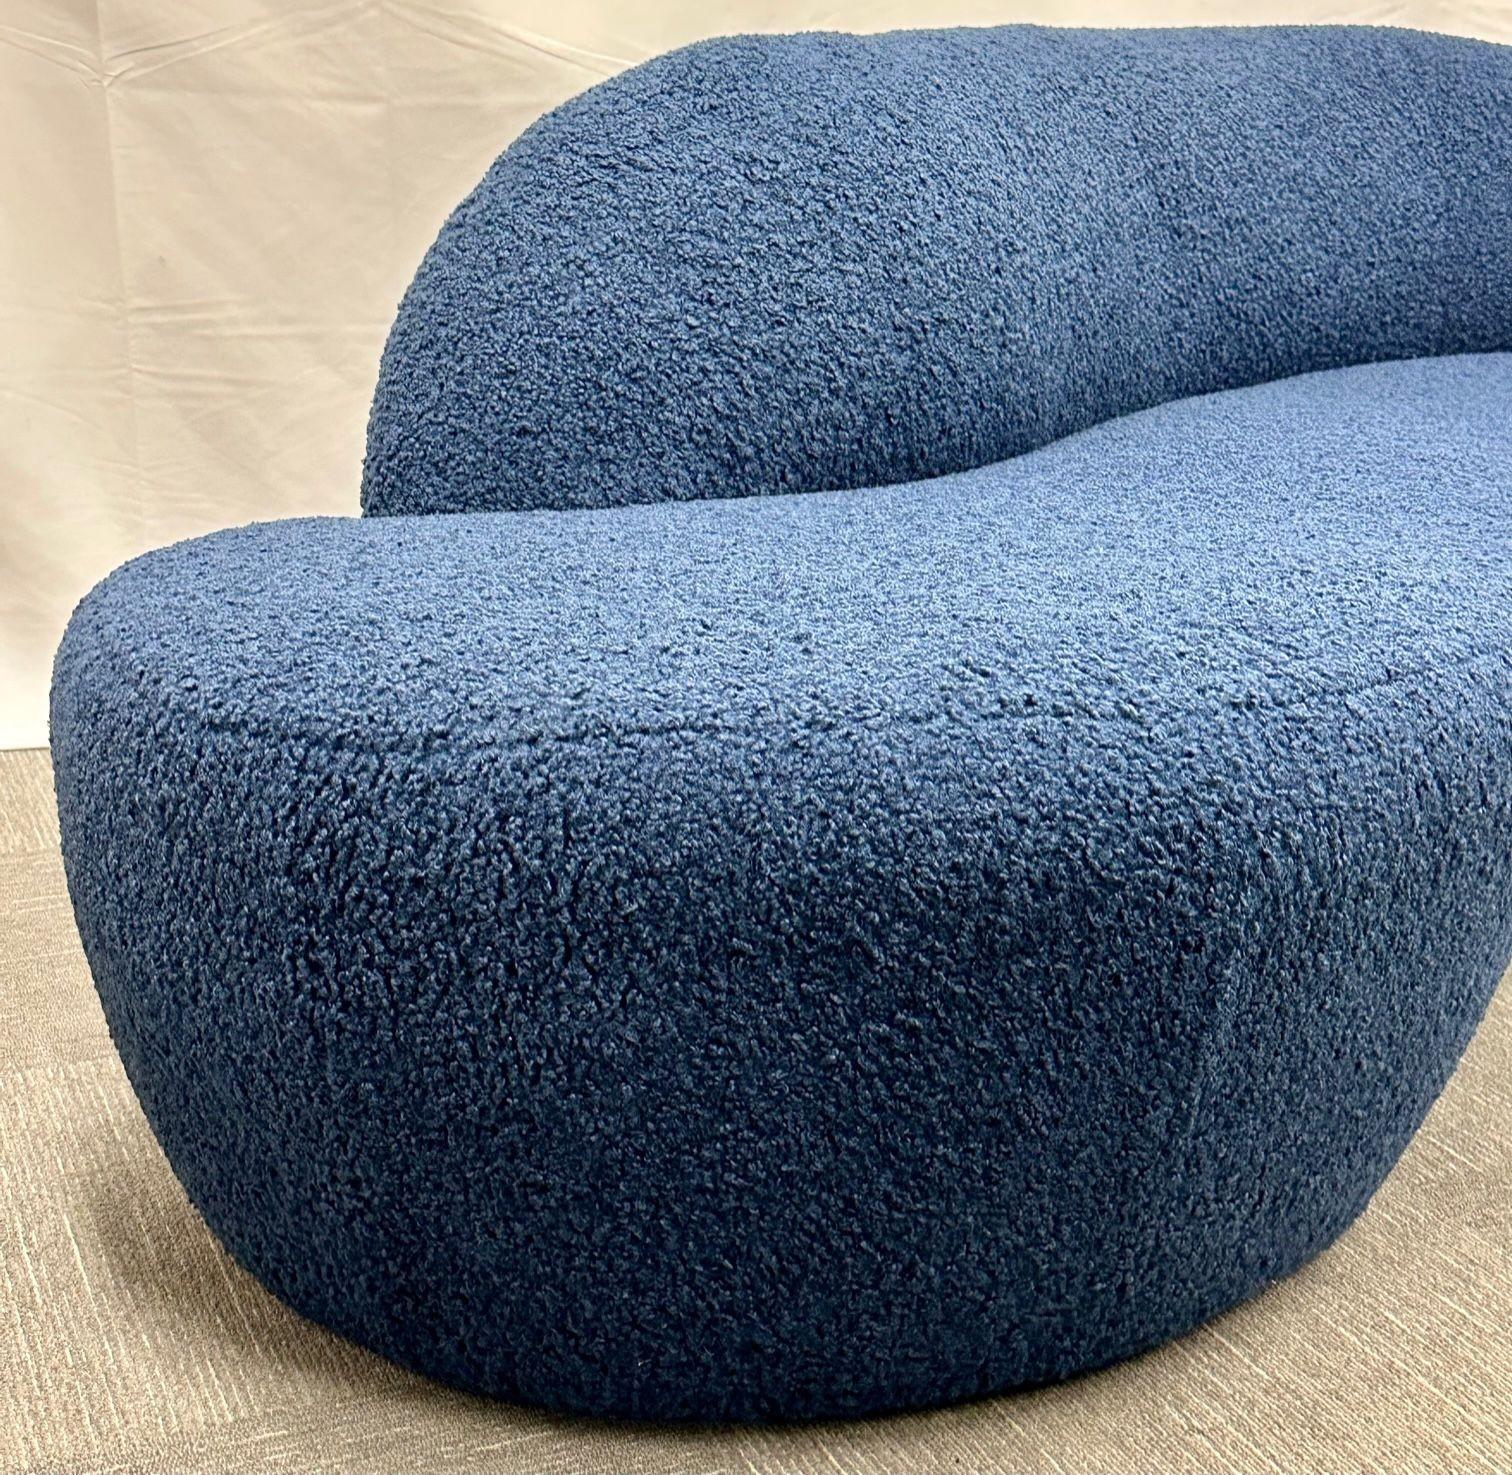 Contemporary Mid-Century Modern Style Organic Form Kidney Shaped Cloud Sofa, Blue Boucle For Sale